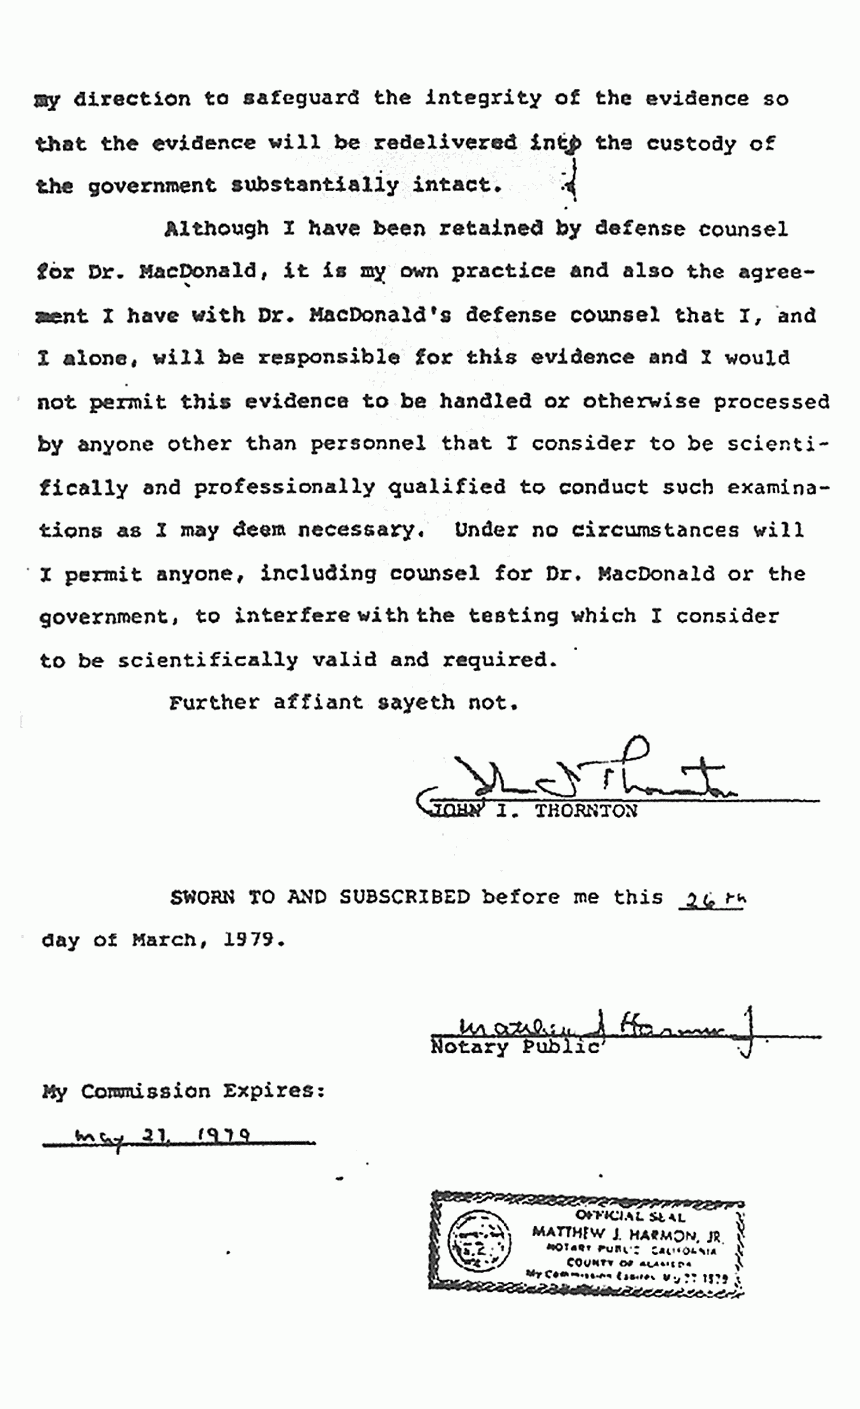 March 26, 1979: Affidavit of Dr. John Thornton in Support of Defendant's Motion to Compel production of Tangible Objects, p. 5 of 5